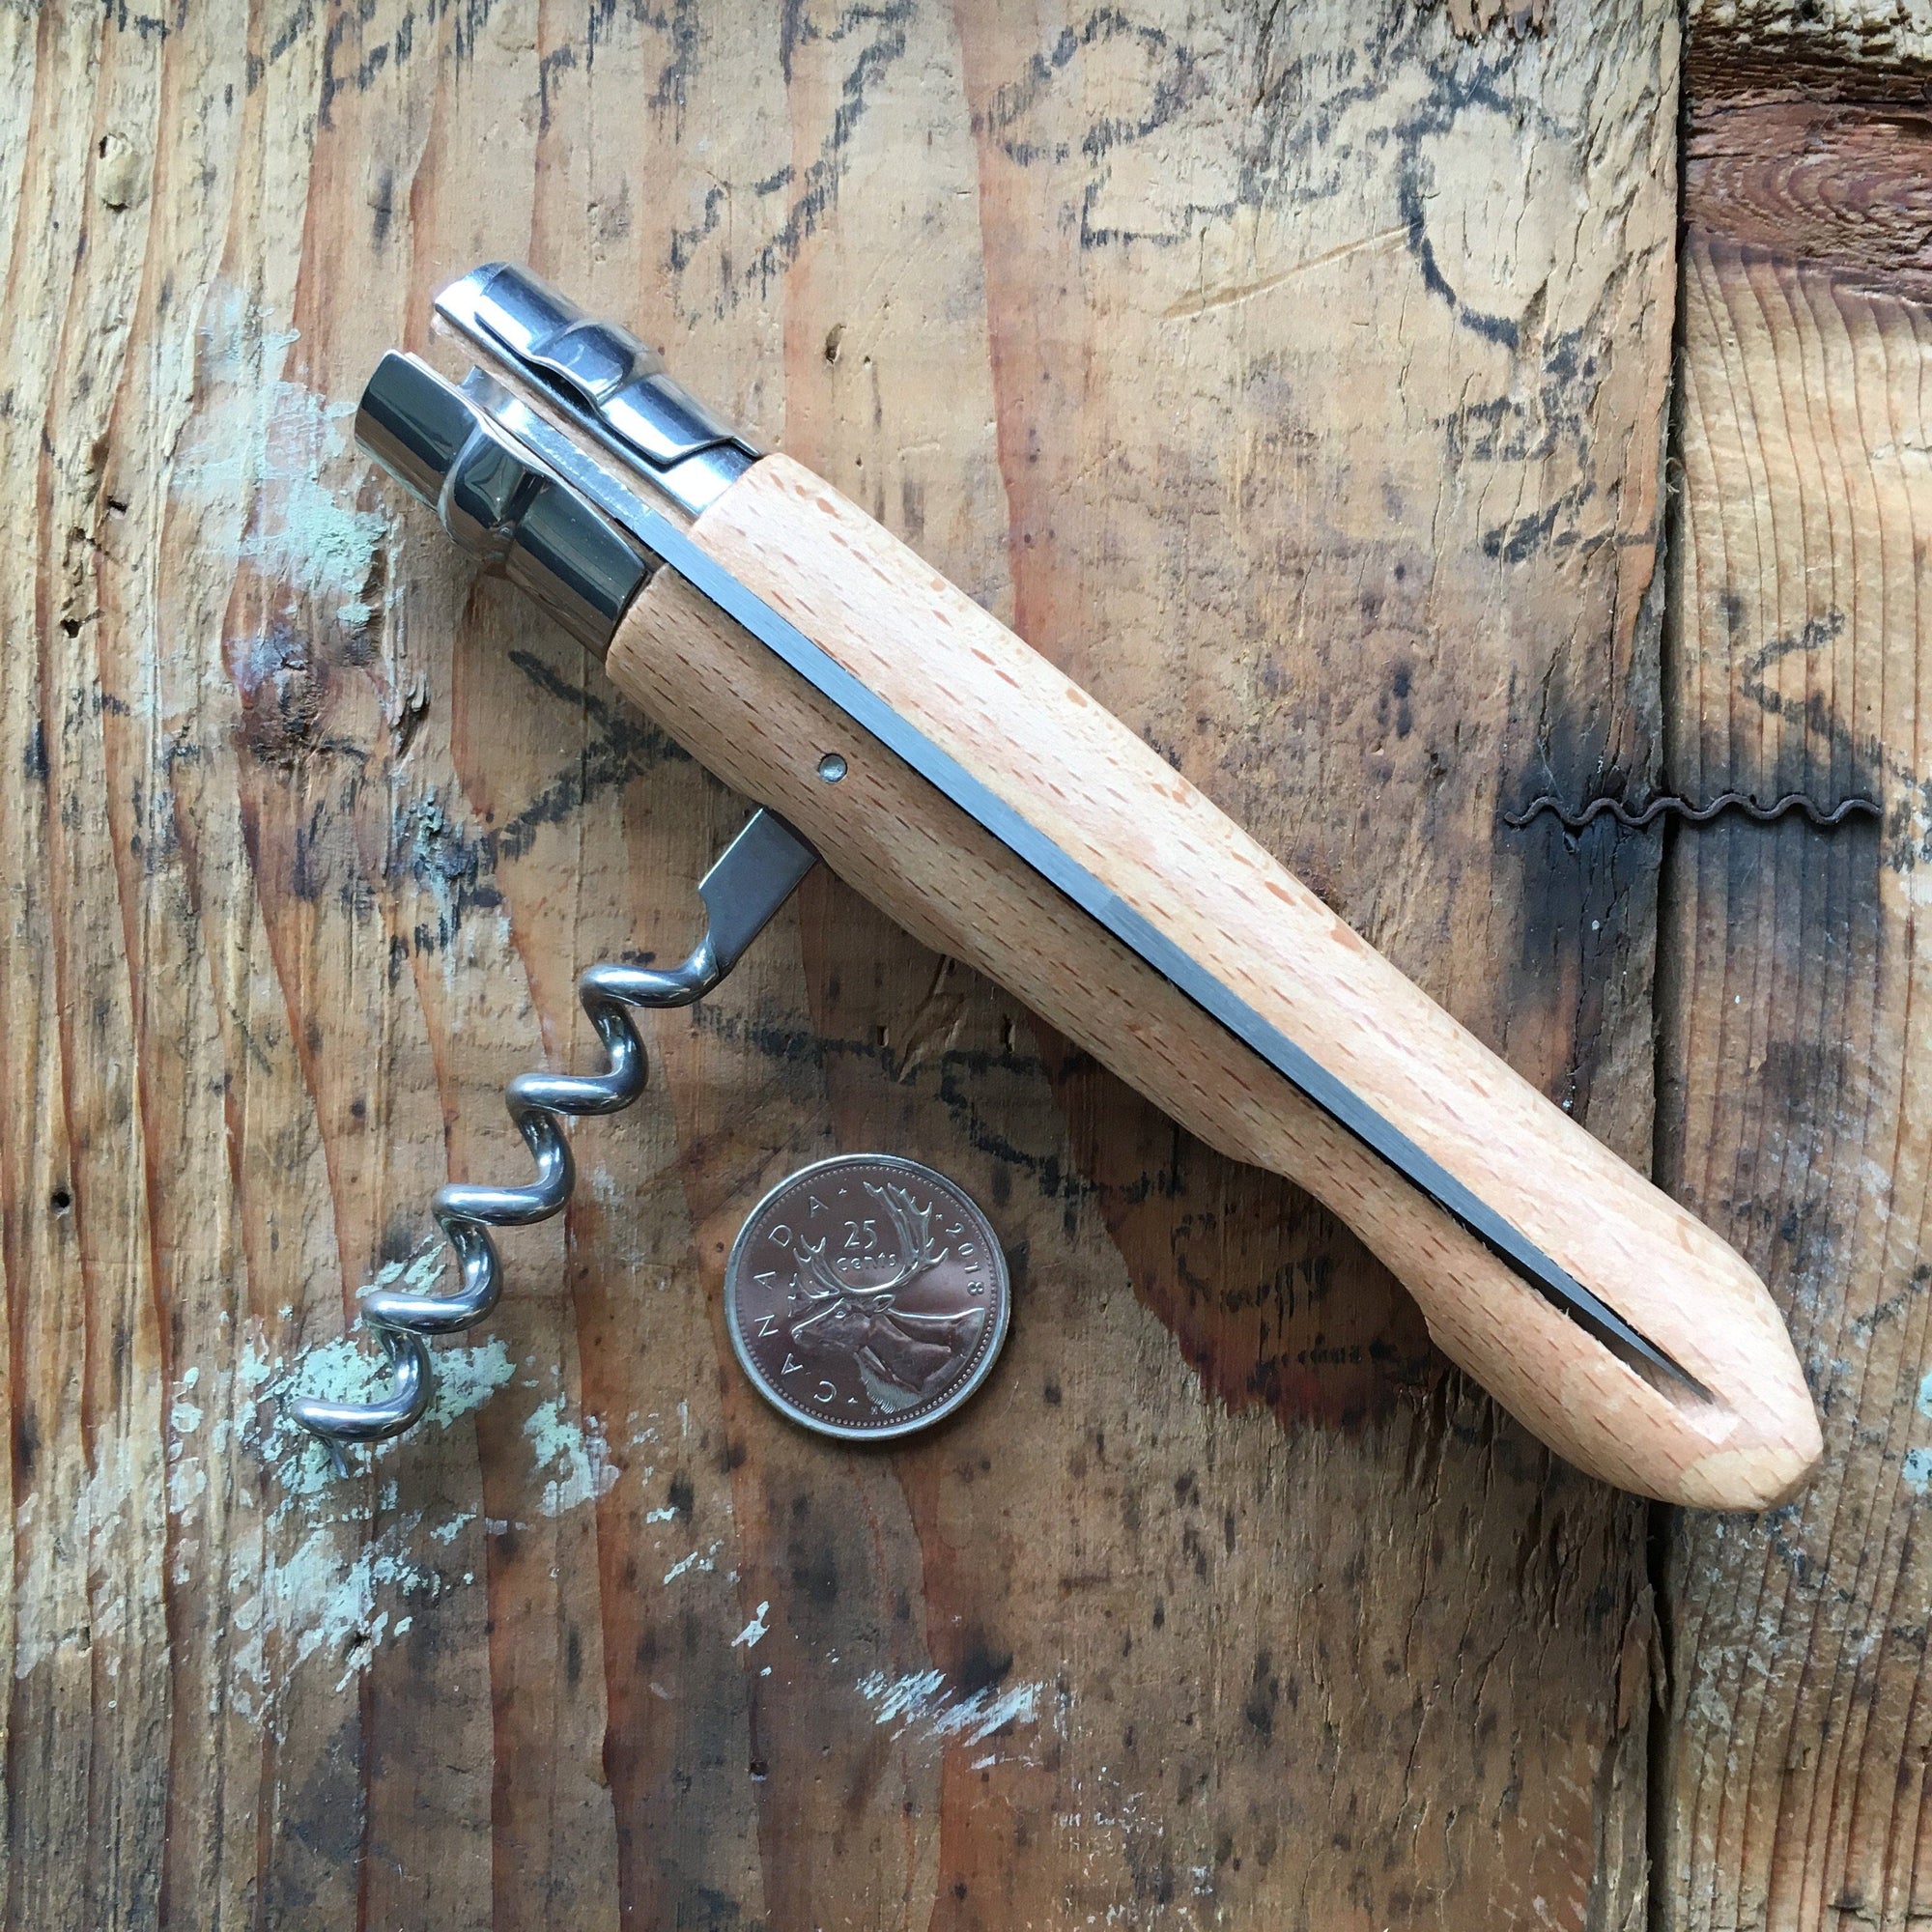 Opinel  No.10 Corkscrew Folding Knife with Bottle Opener - OPINEL USA